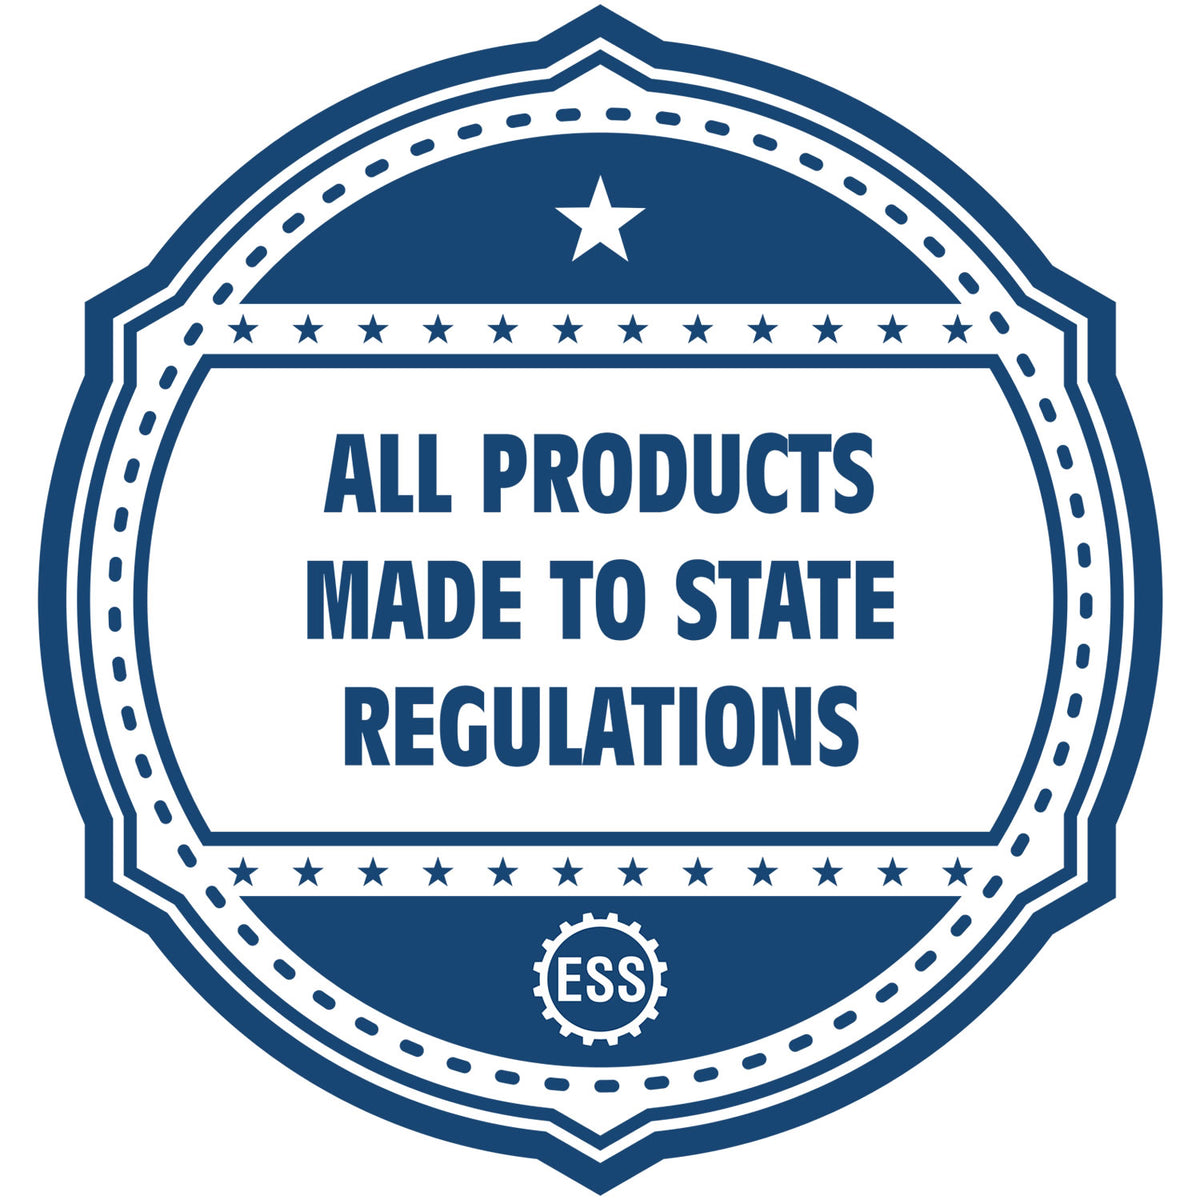 An icon or badge element for the Handheld Kansas Architect Seal Embosser showing that this product is made in compliance with state regulations.